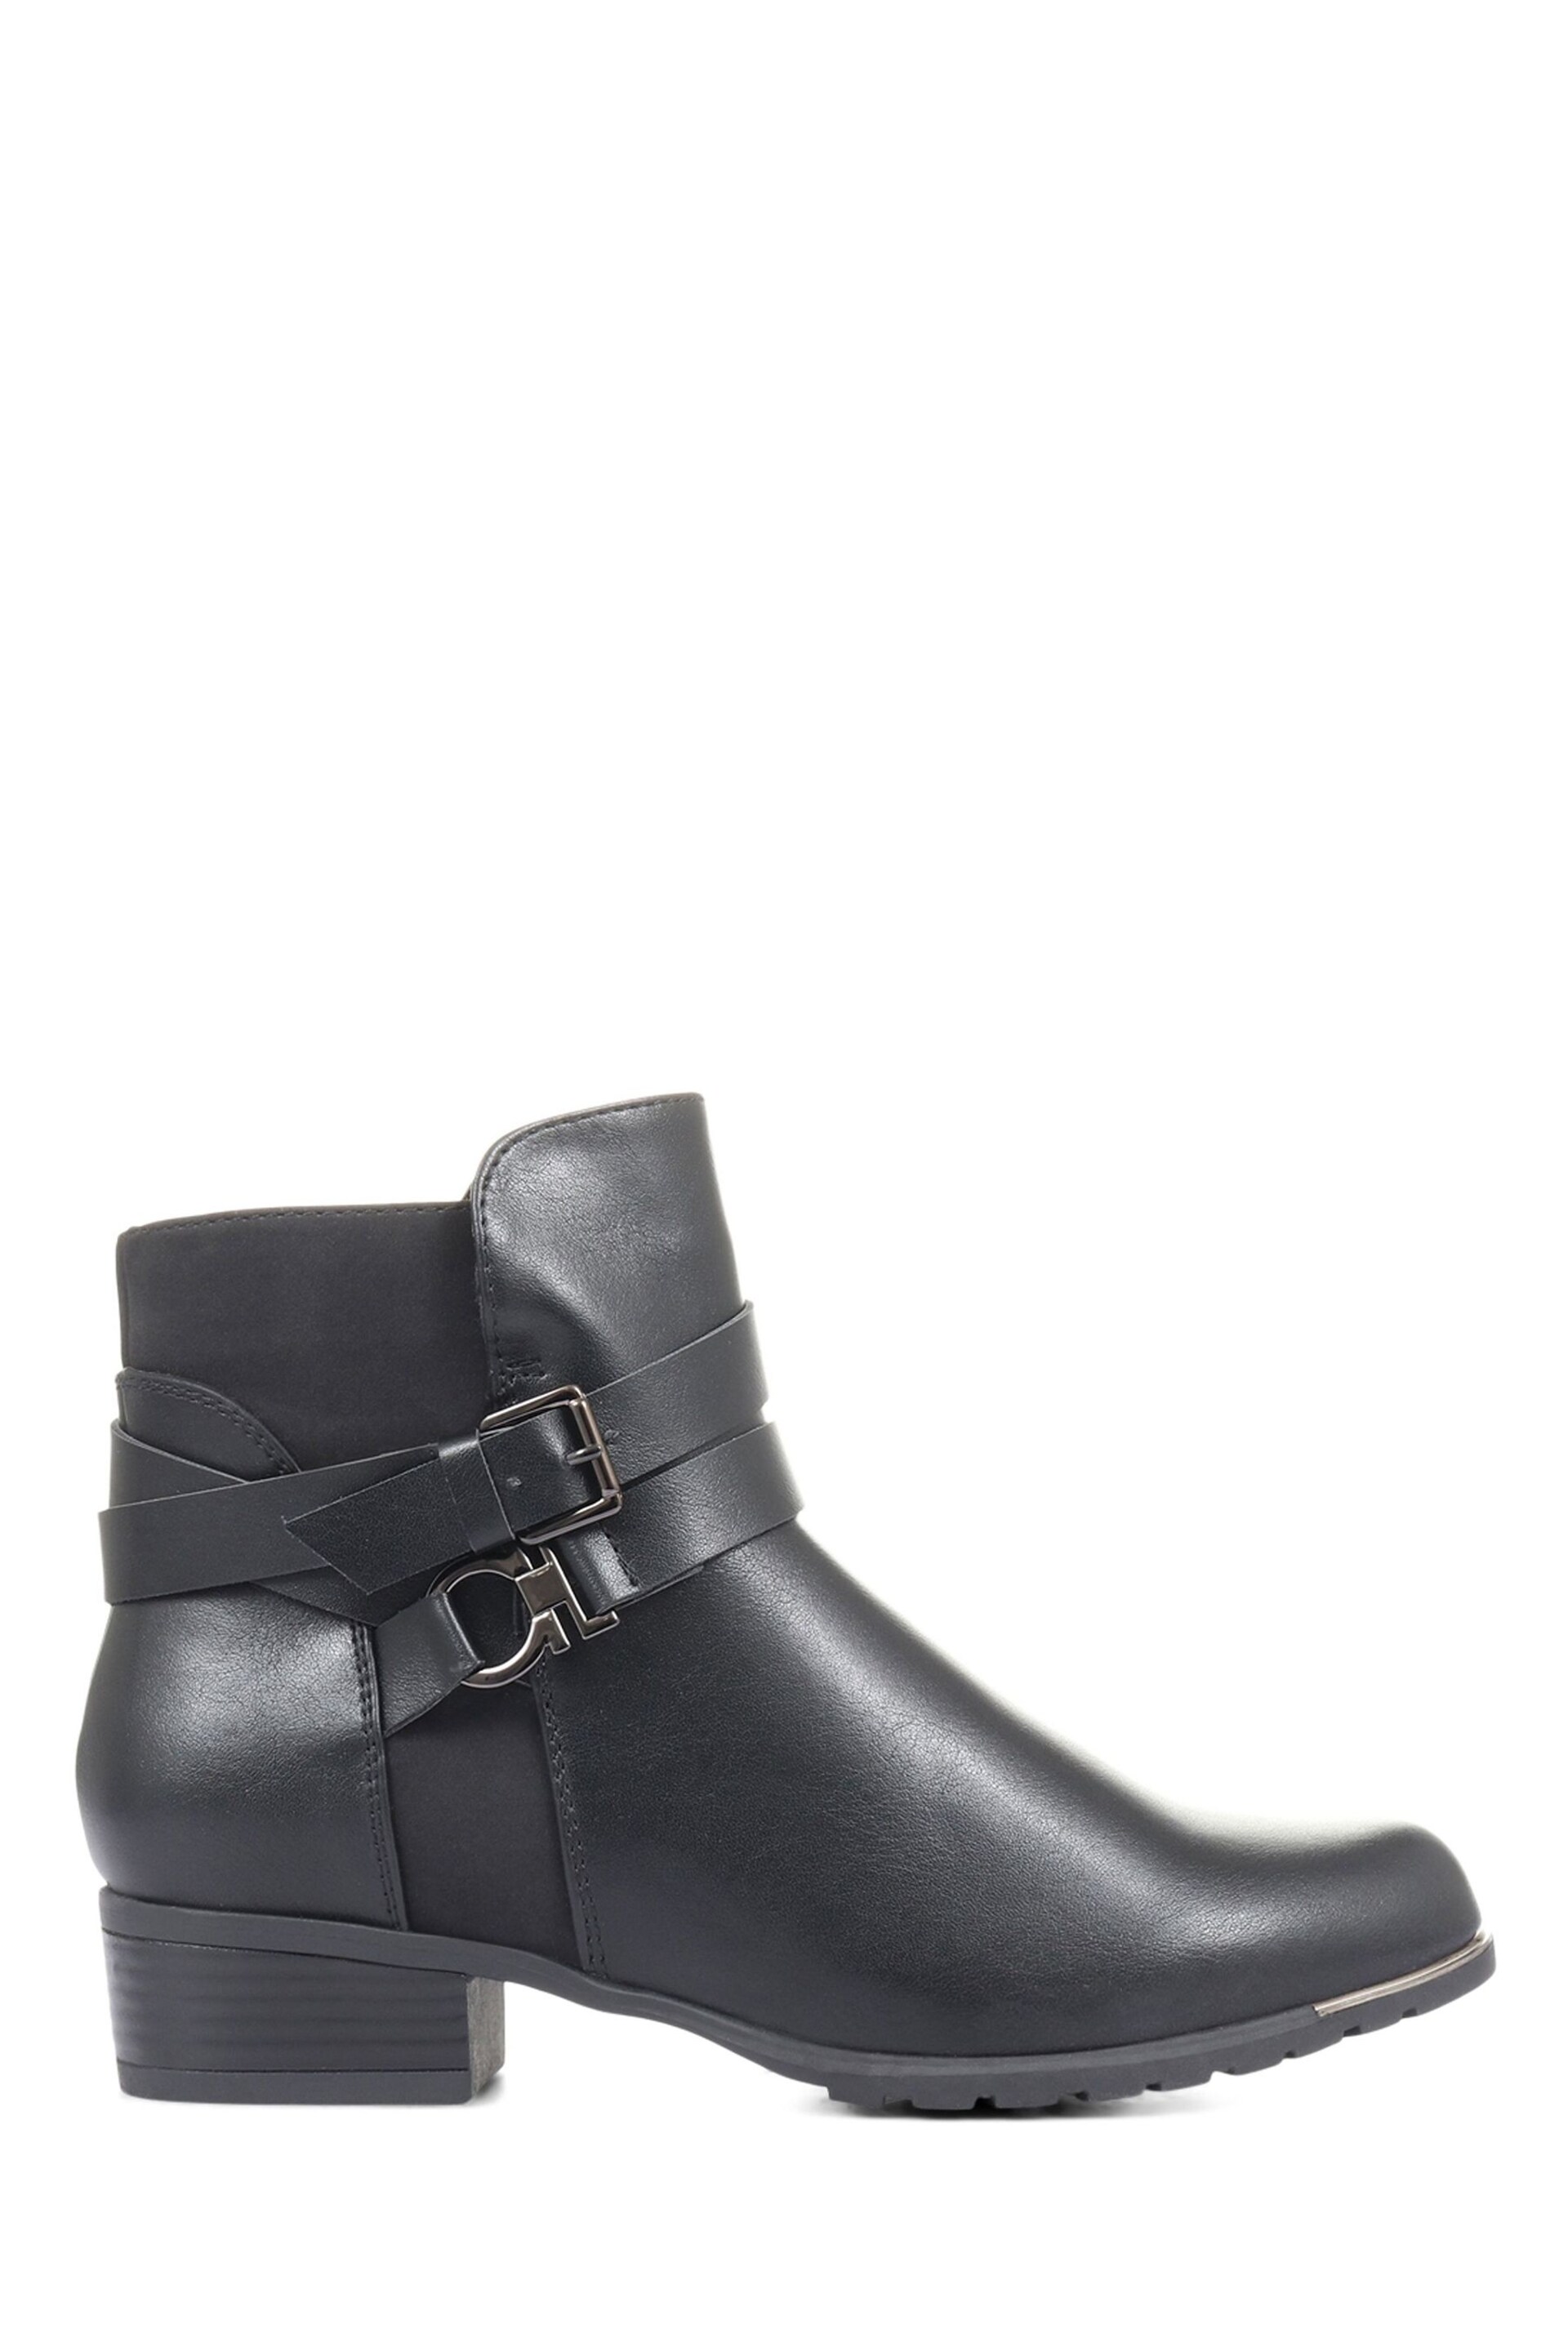 Pavers Ladies	Flat Ankle Boots - Image 1 of 5